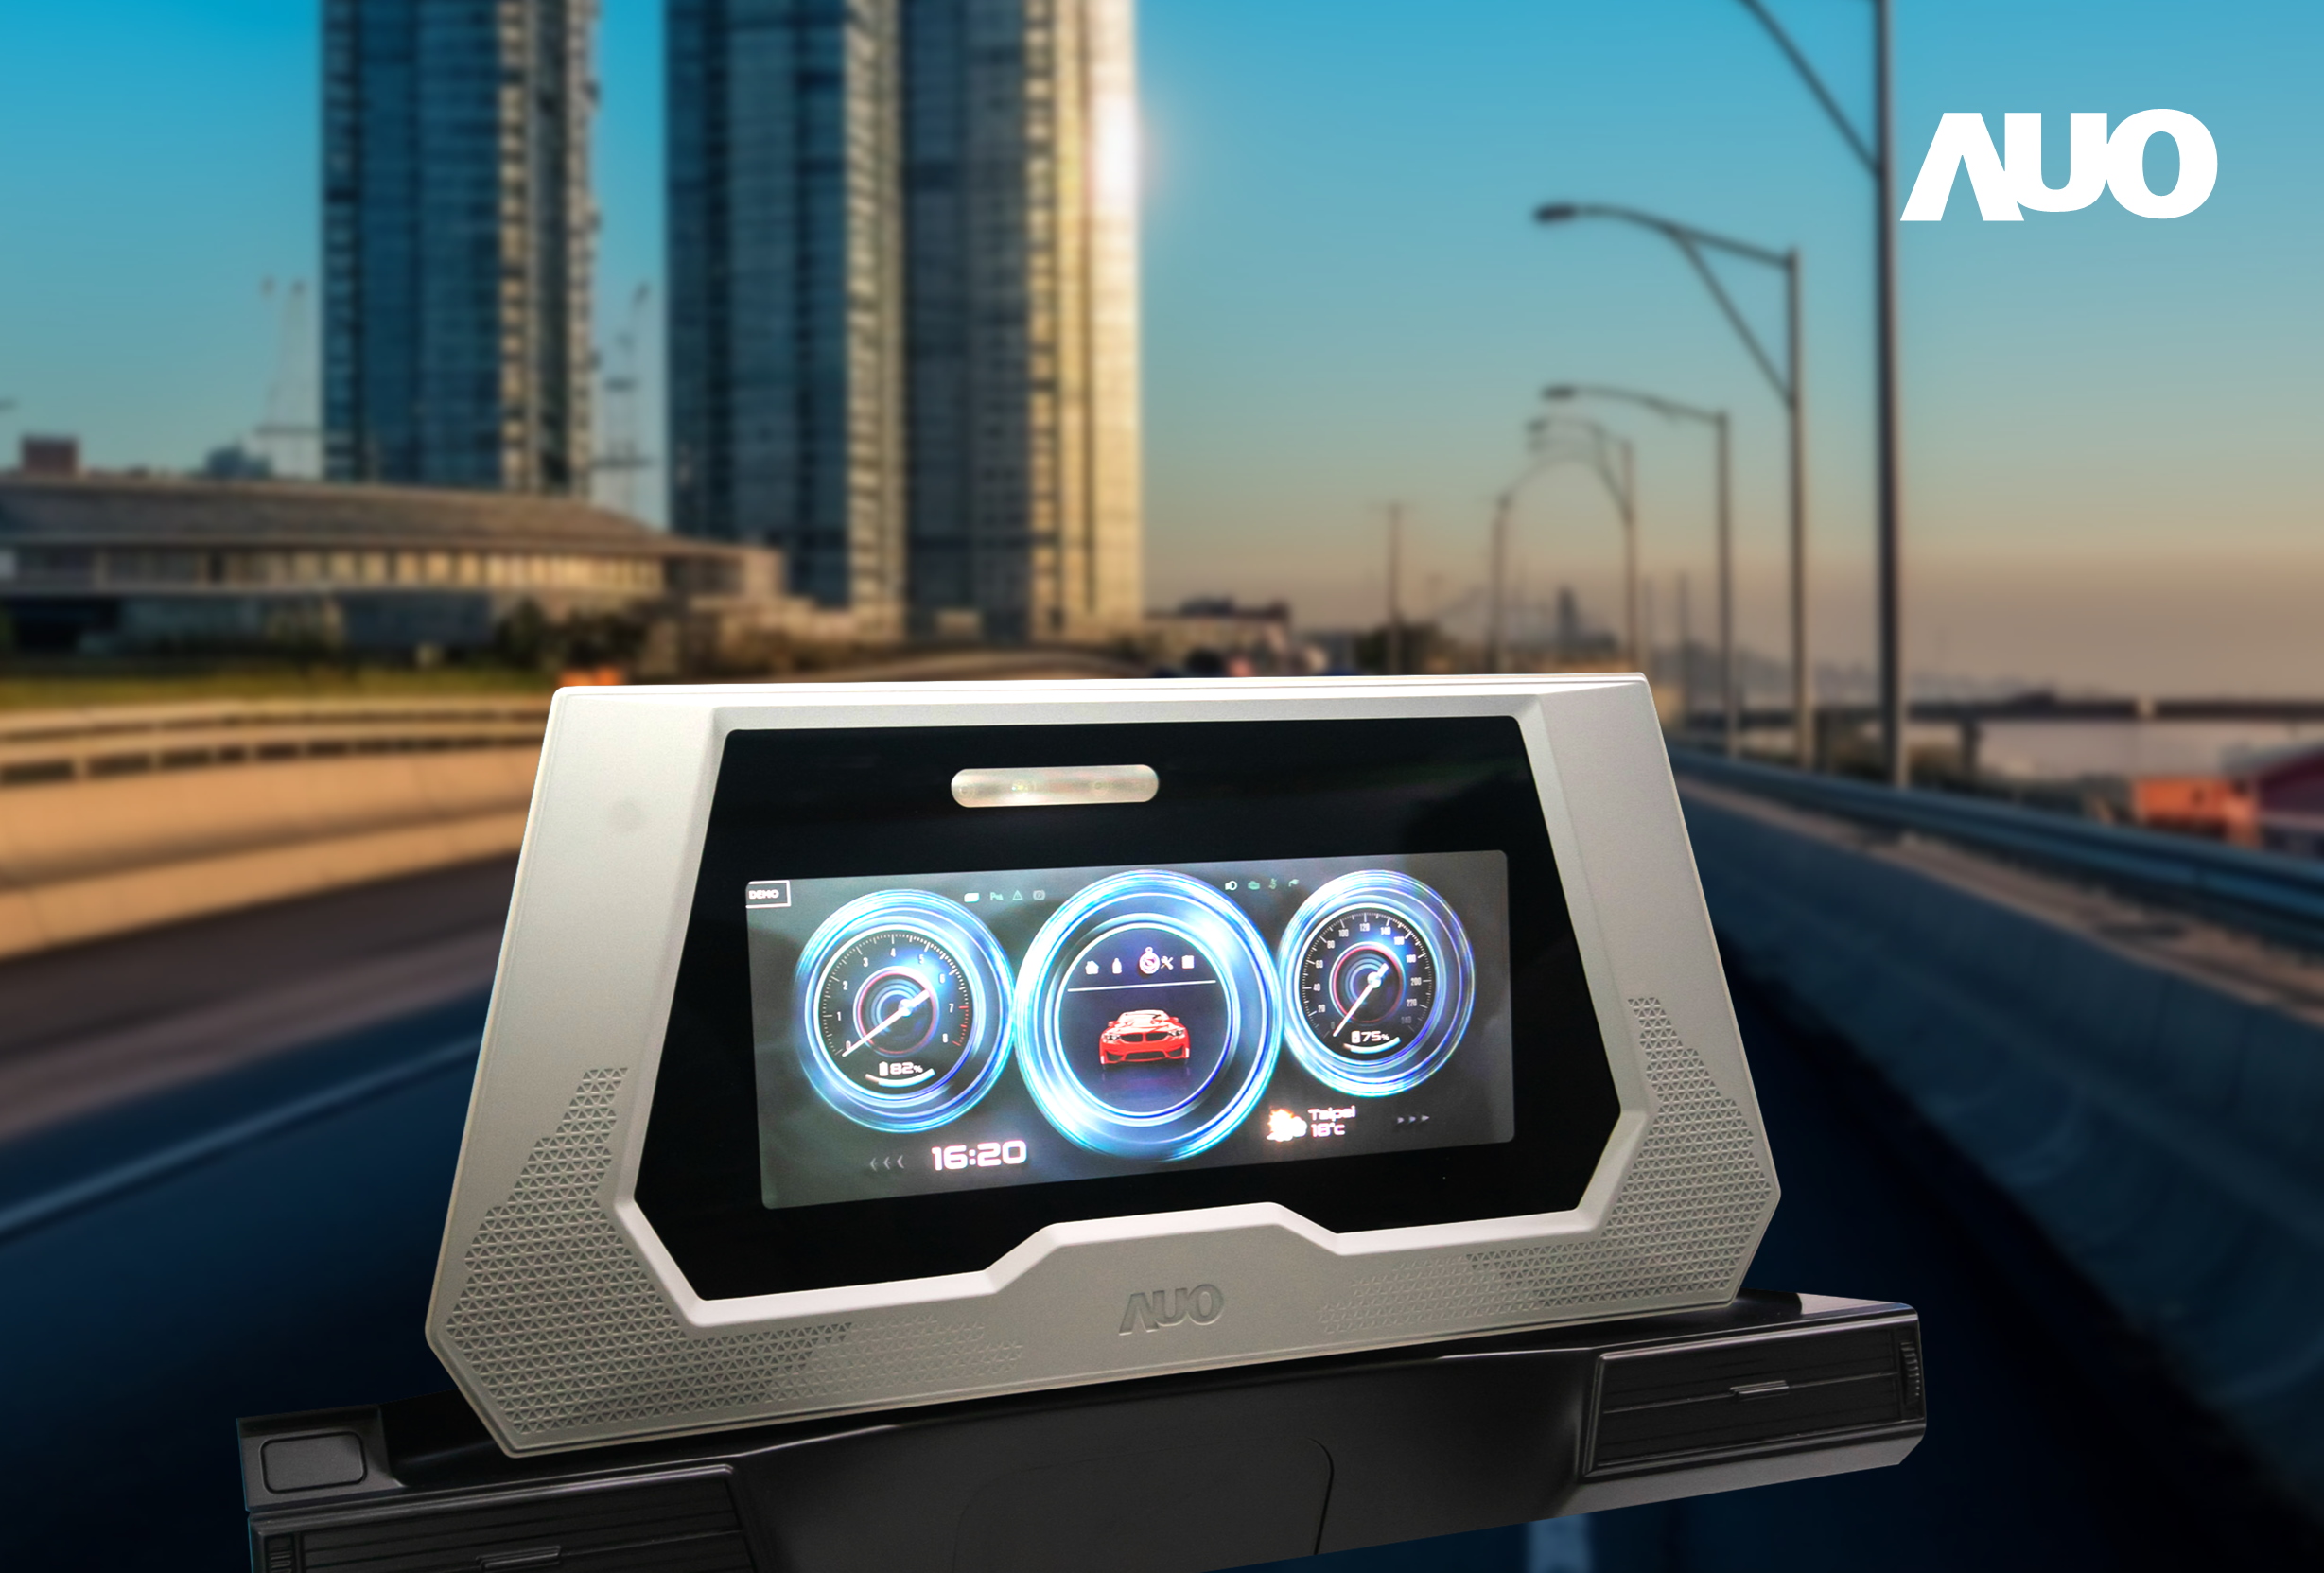 AUO showcases its High-transparency Micro LED coupled with LCD display integrated digital dashboards in smart cockpits, providing users with comfortable 3D displaying images without having to wear special glasses.